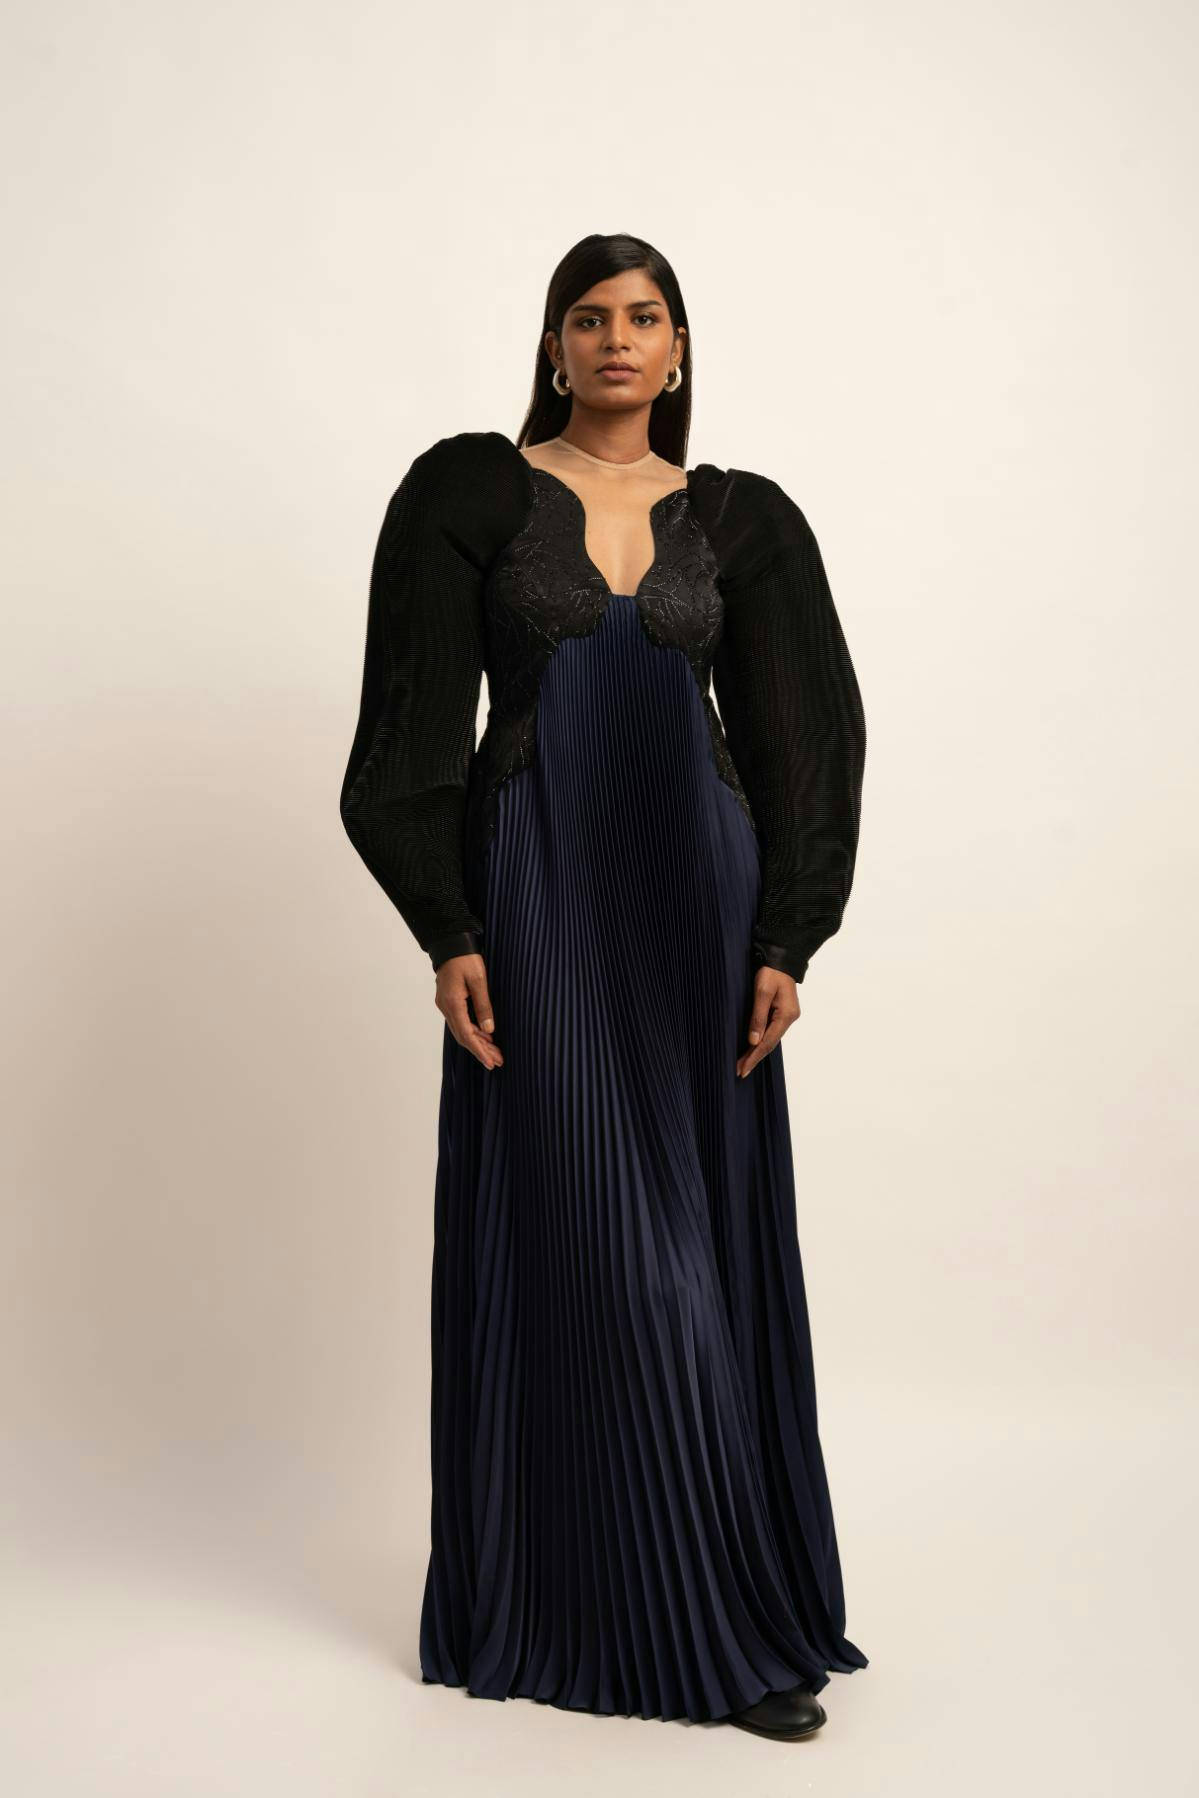 The Elysian Inception Gown, a product by Siddhant Agrawal Label